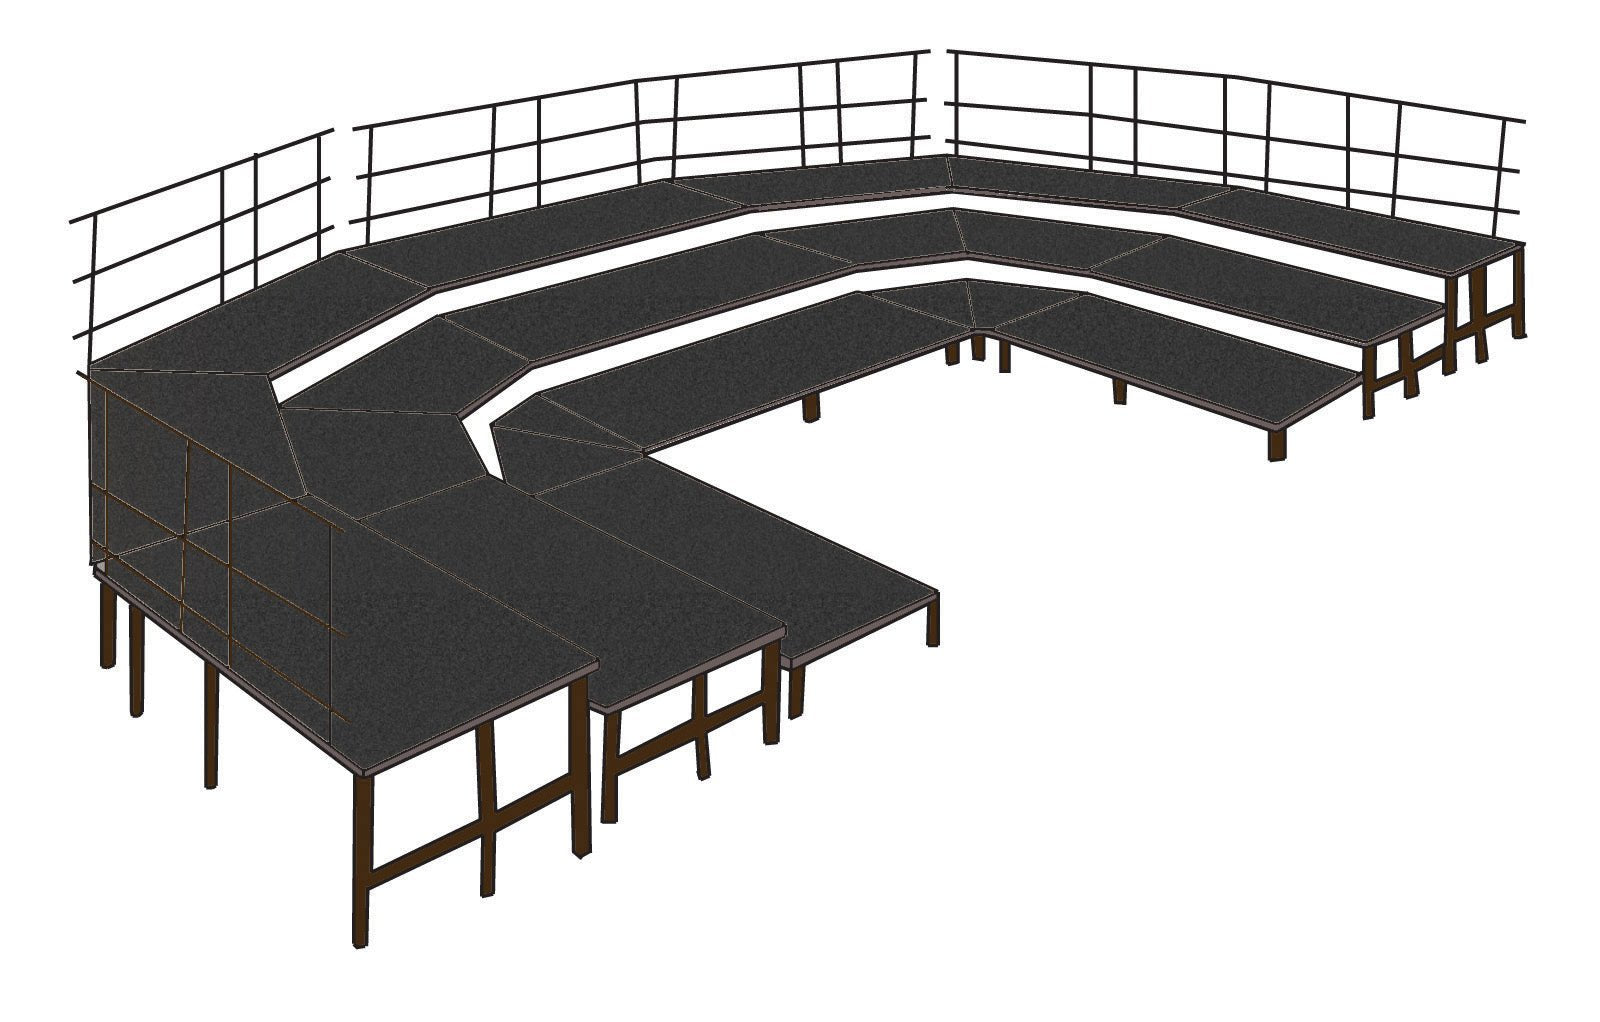 NPS Seated Band Package, 3 Level Stage Configuration Includes Guard Rails (48" Deep Platforms) - SchoolOutlet